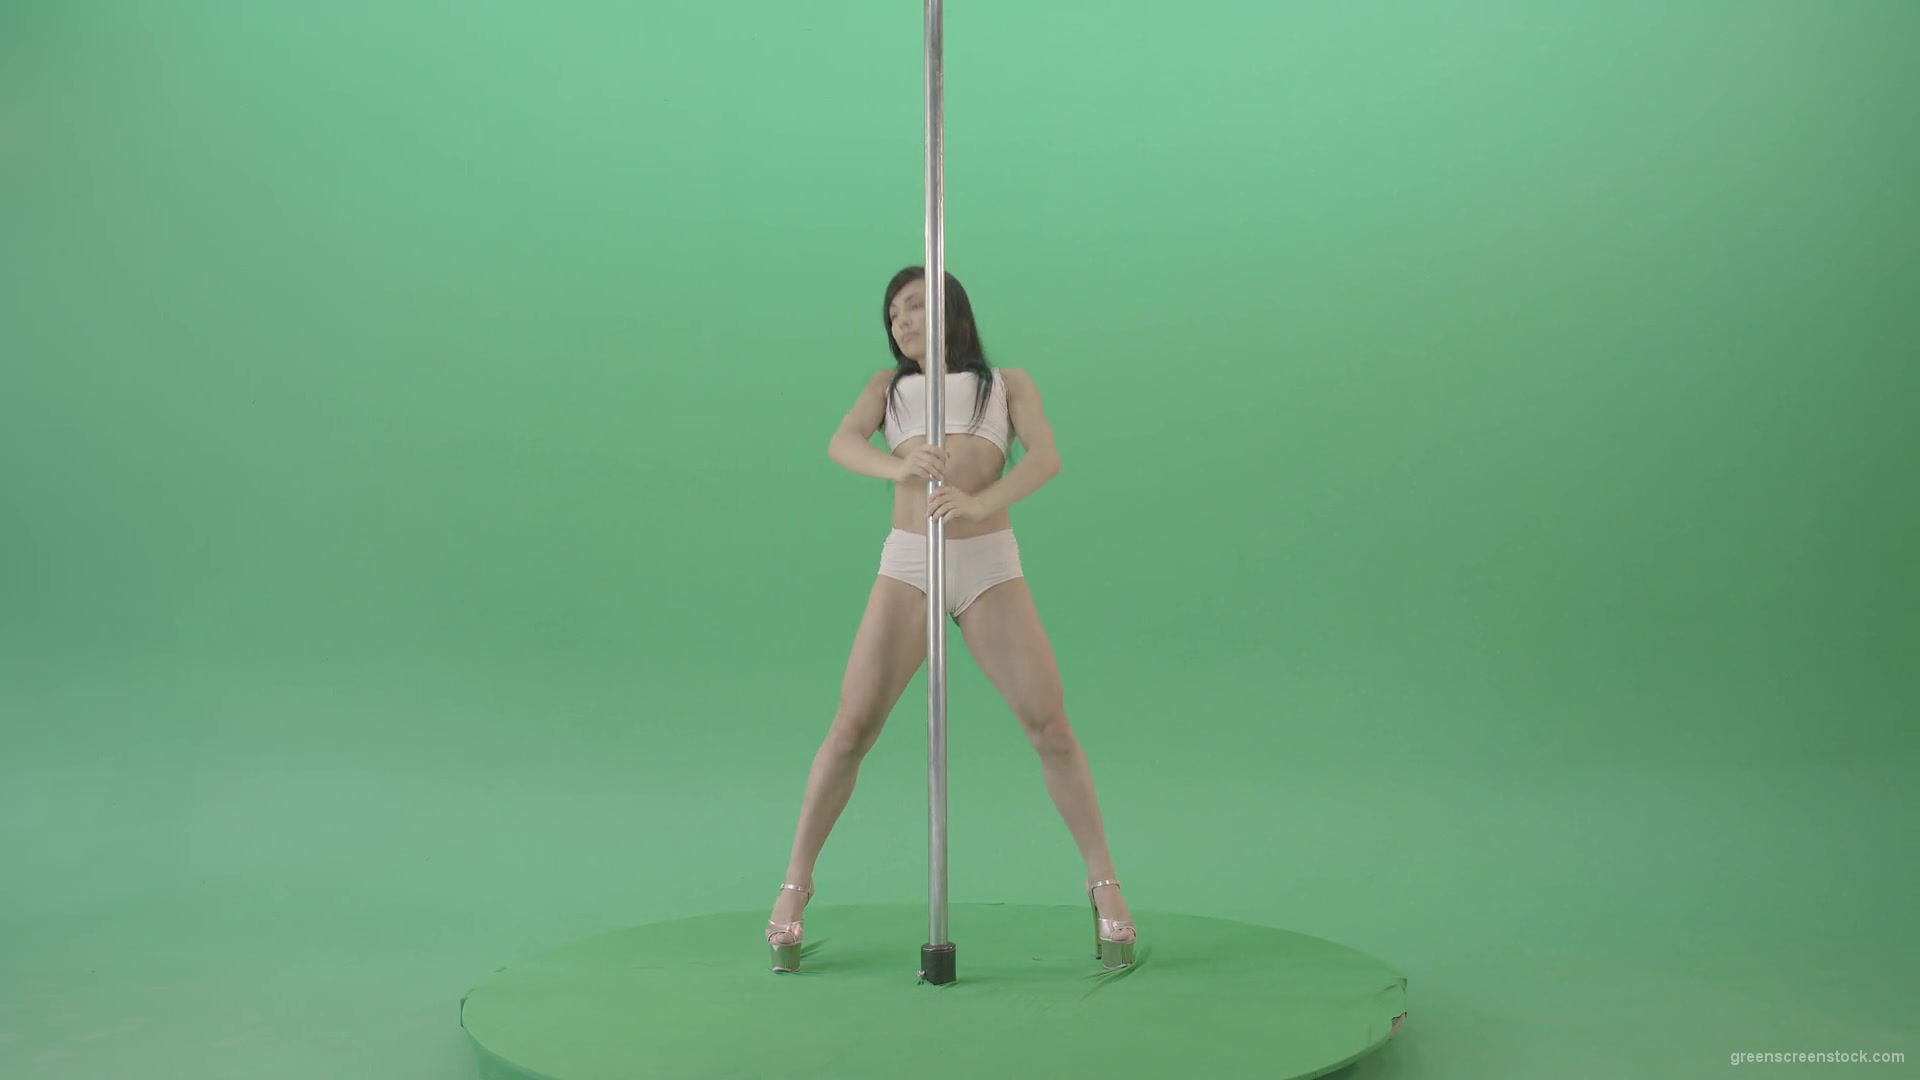 Pole-Dance-sport-girl-waving-sexy-body-isolated-on-green-screen-4K-Video-Footage-1920_009 Green Screen Stock